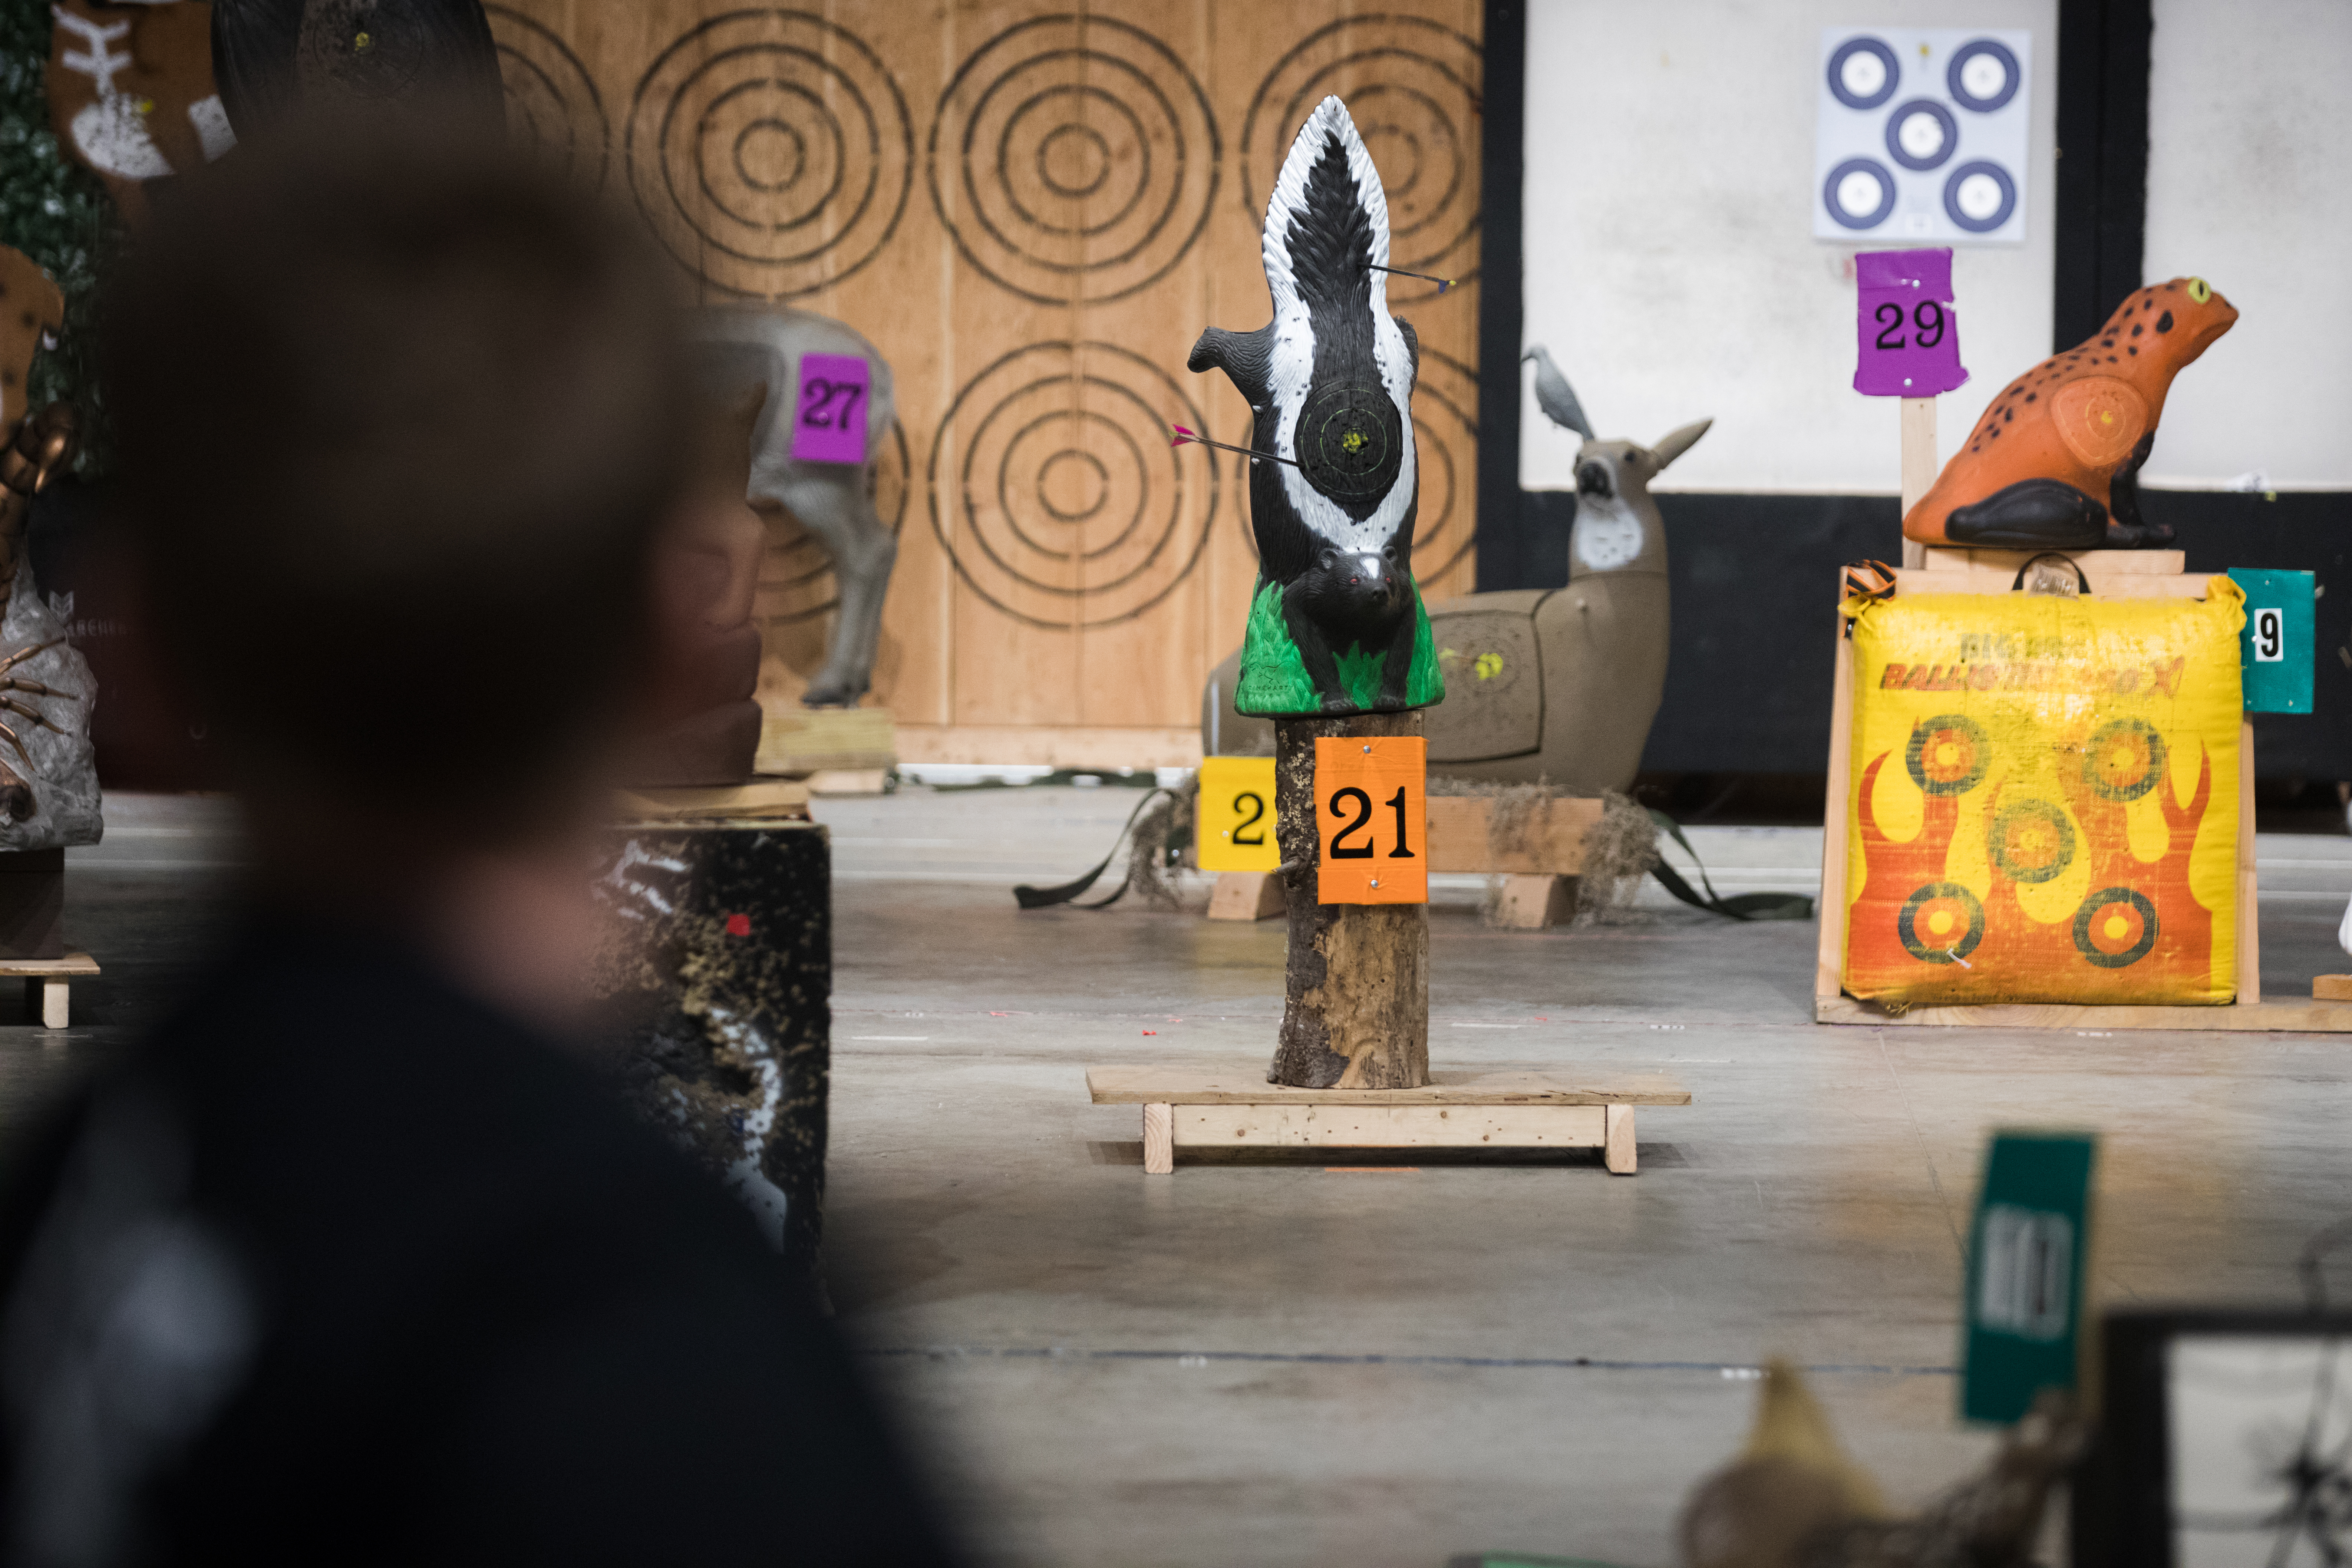 Each animal is given a different point amount. At the end of the night, the shooters tally their point totals and are added to a leader board.